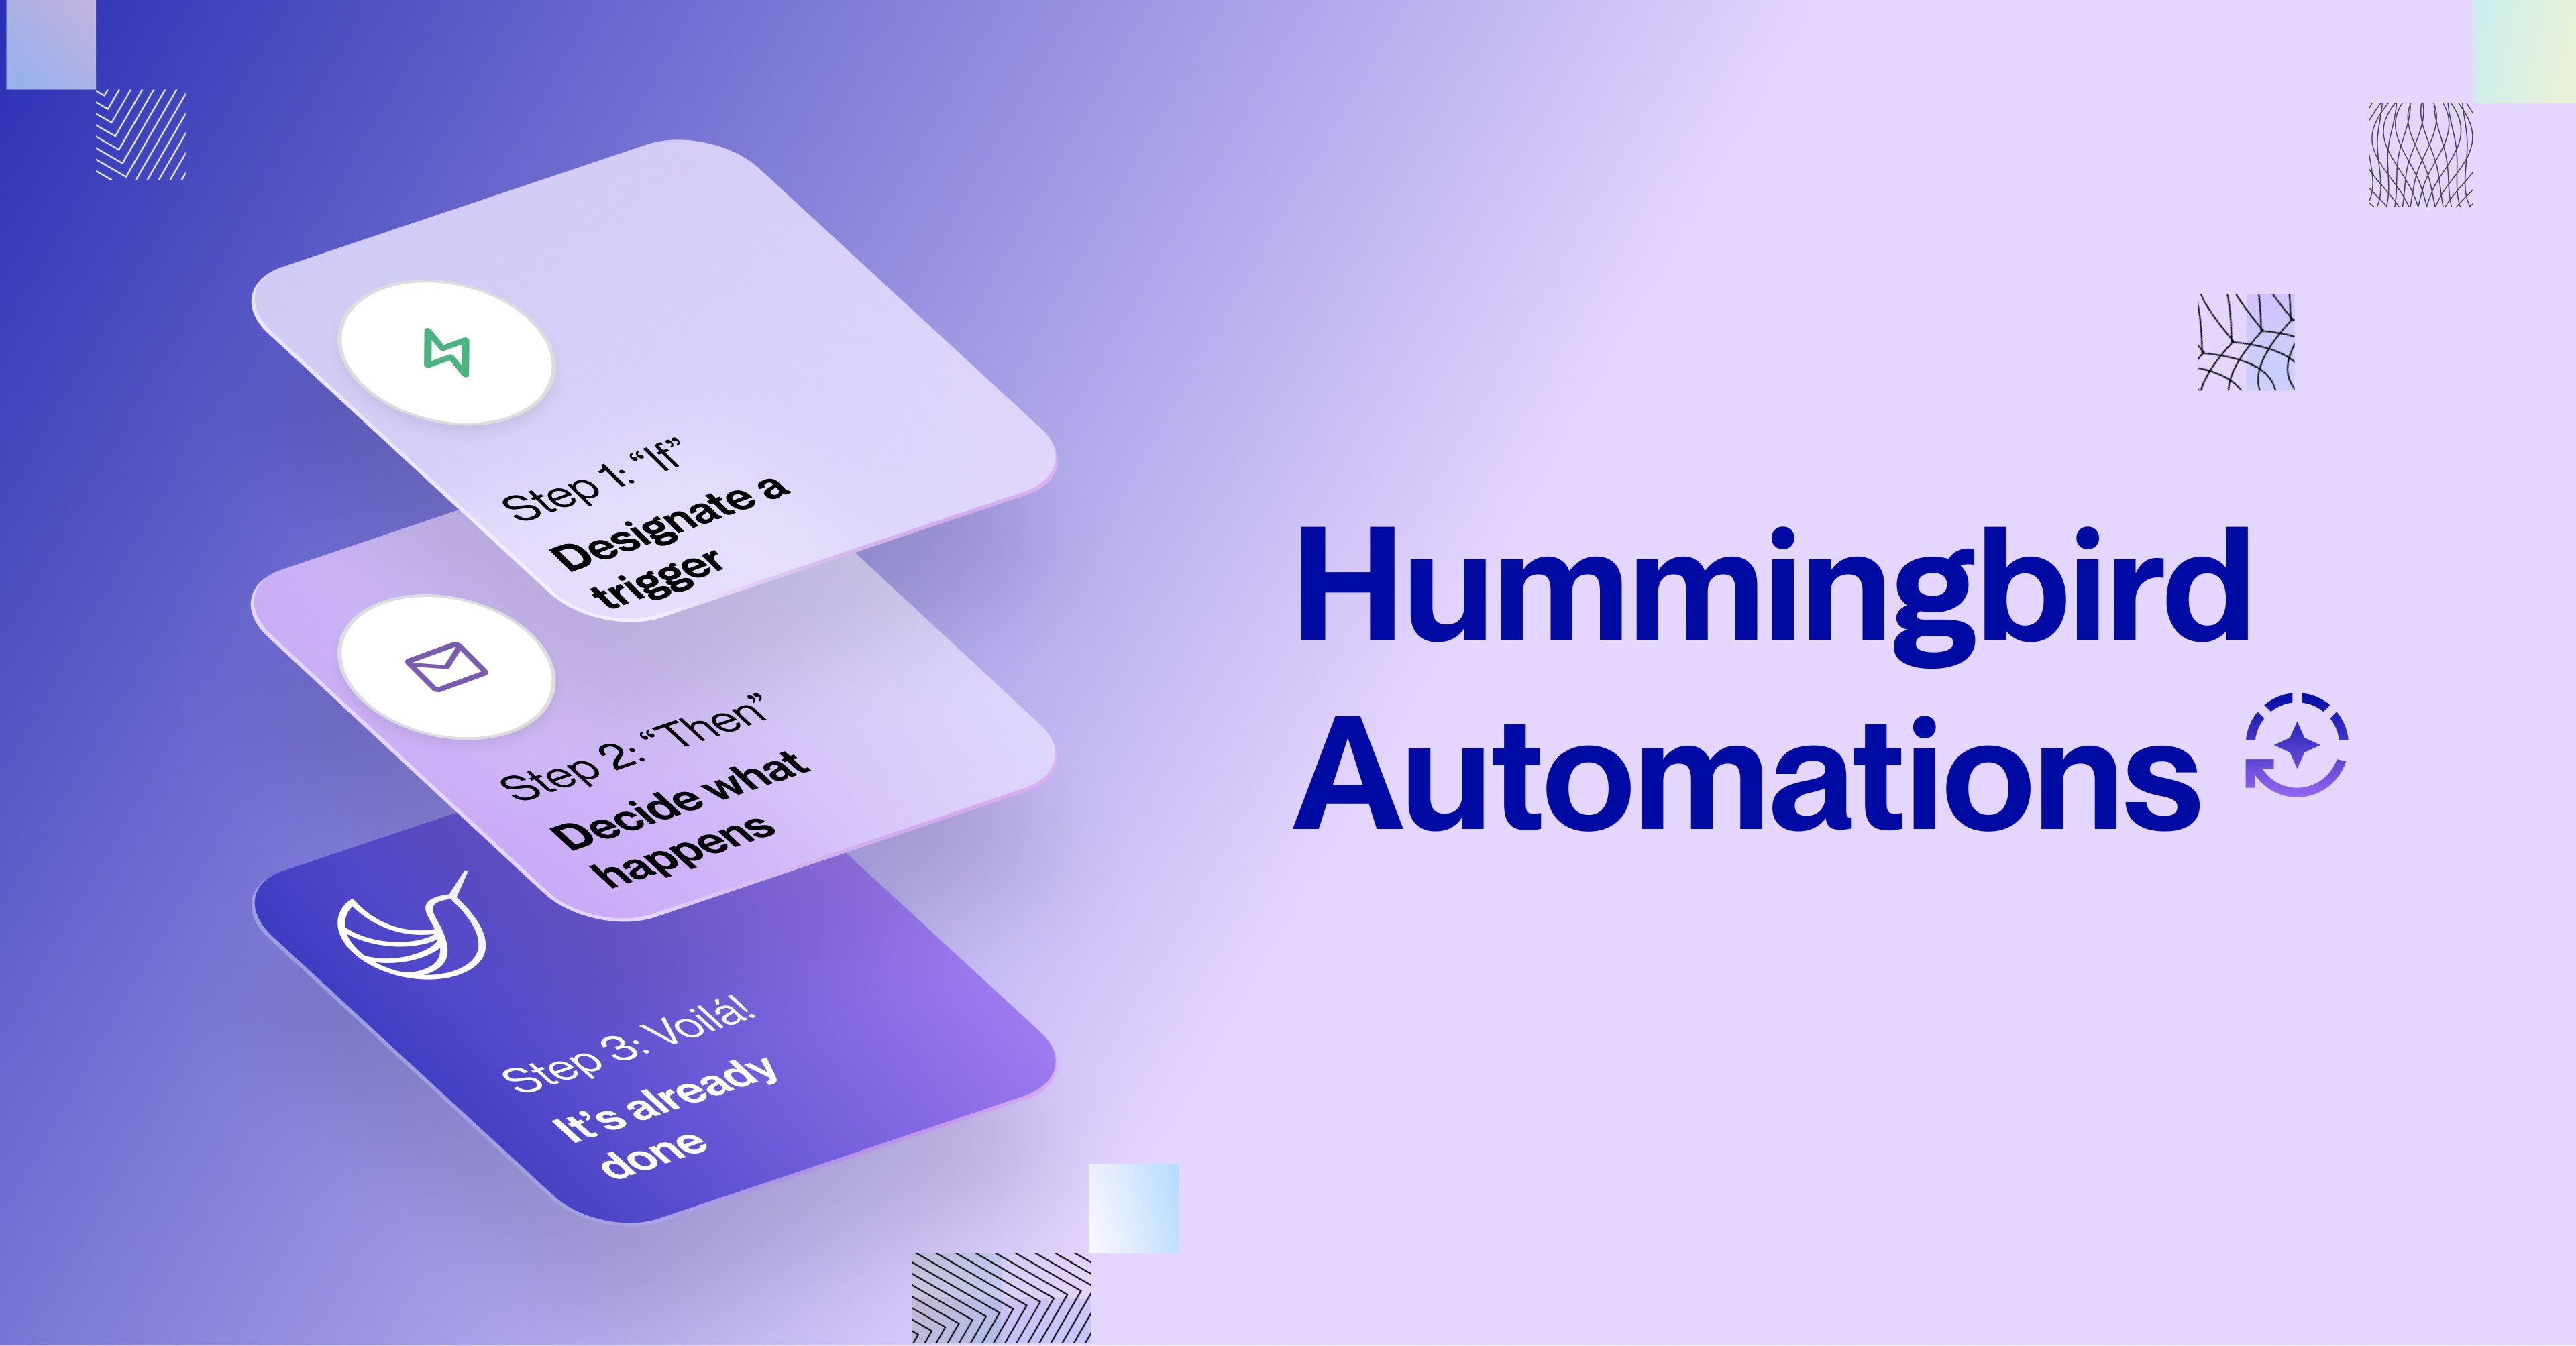 Introducing Hummingbird Automations: A New Way To Safely Automate Your Compliance Processes